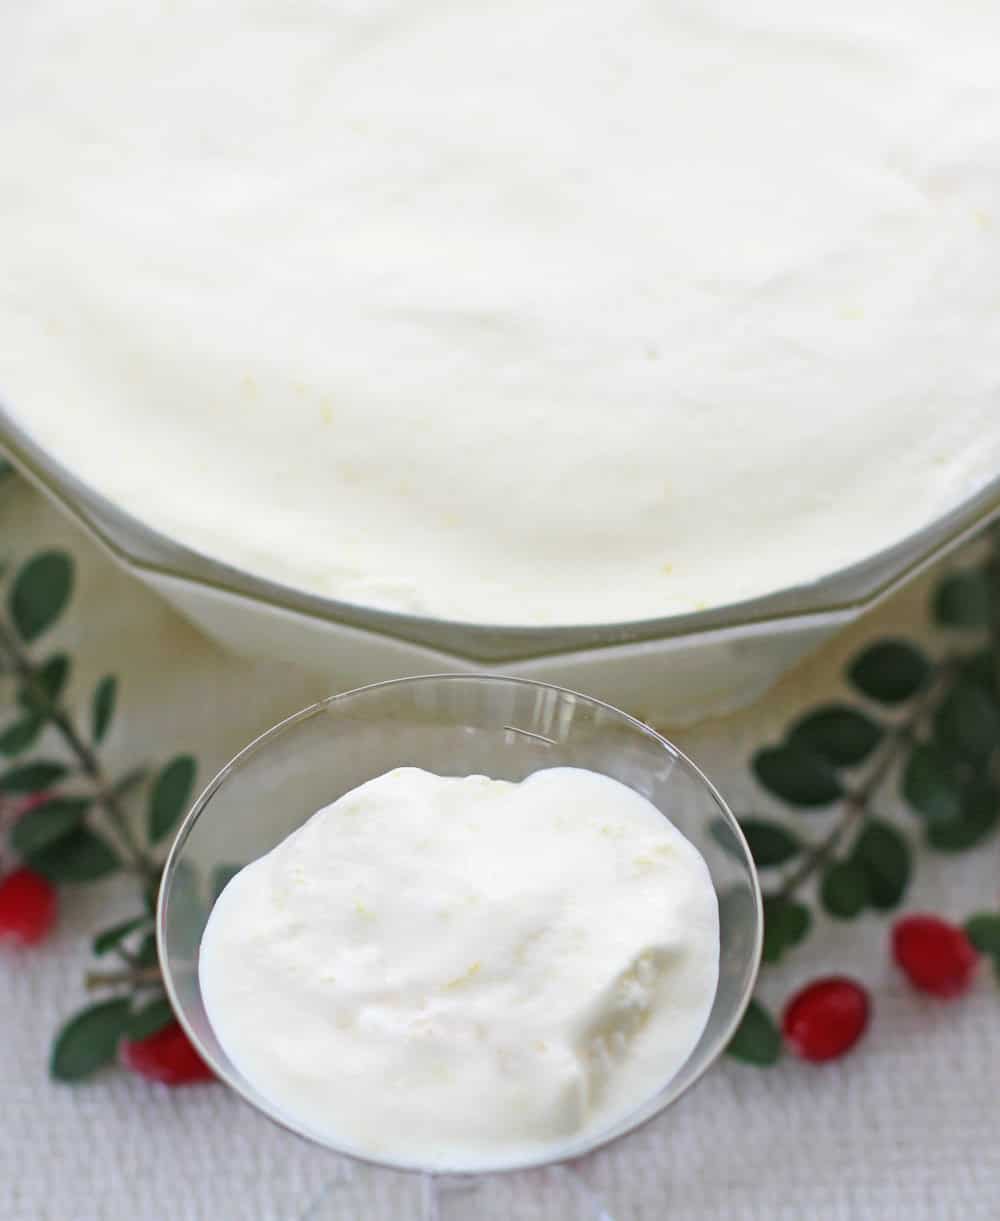 Making lemon chiffon mousse with pasteurized eggs eliminates the risk of salmonella from raw eggs.